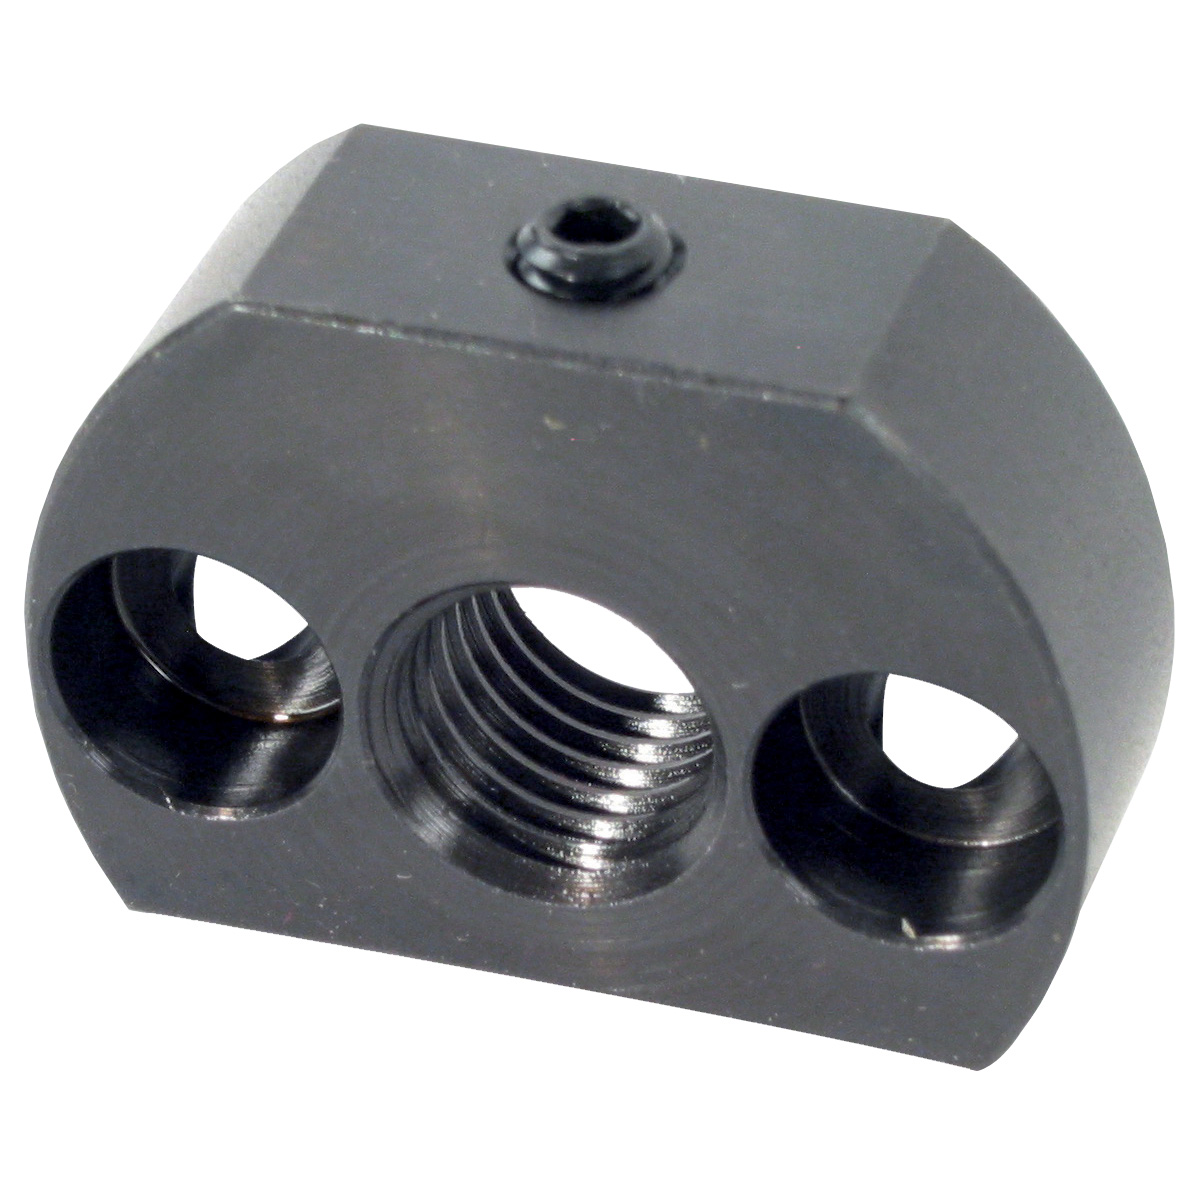 Locking bolt support bracket - Mounting holes parallel to locating bolt -  - 